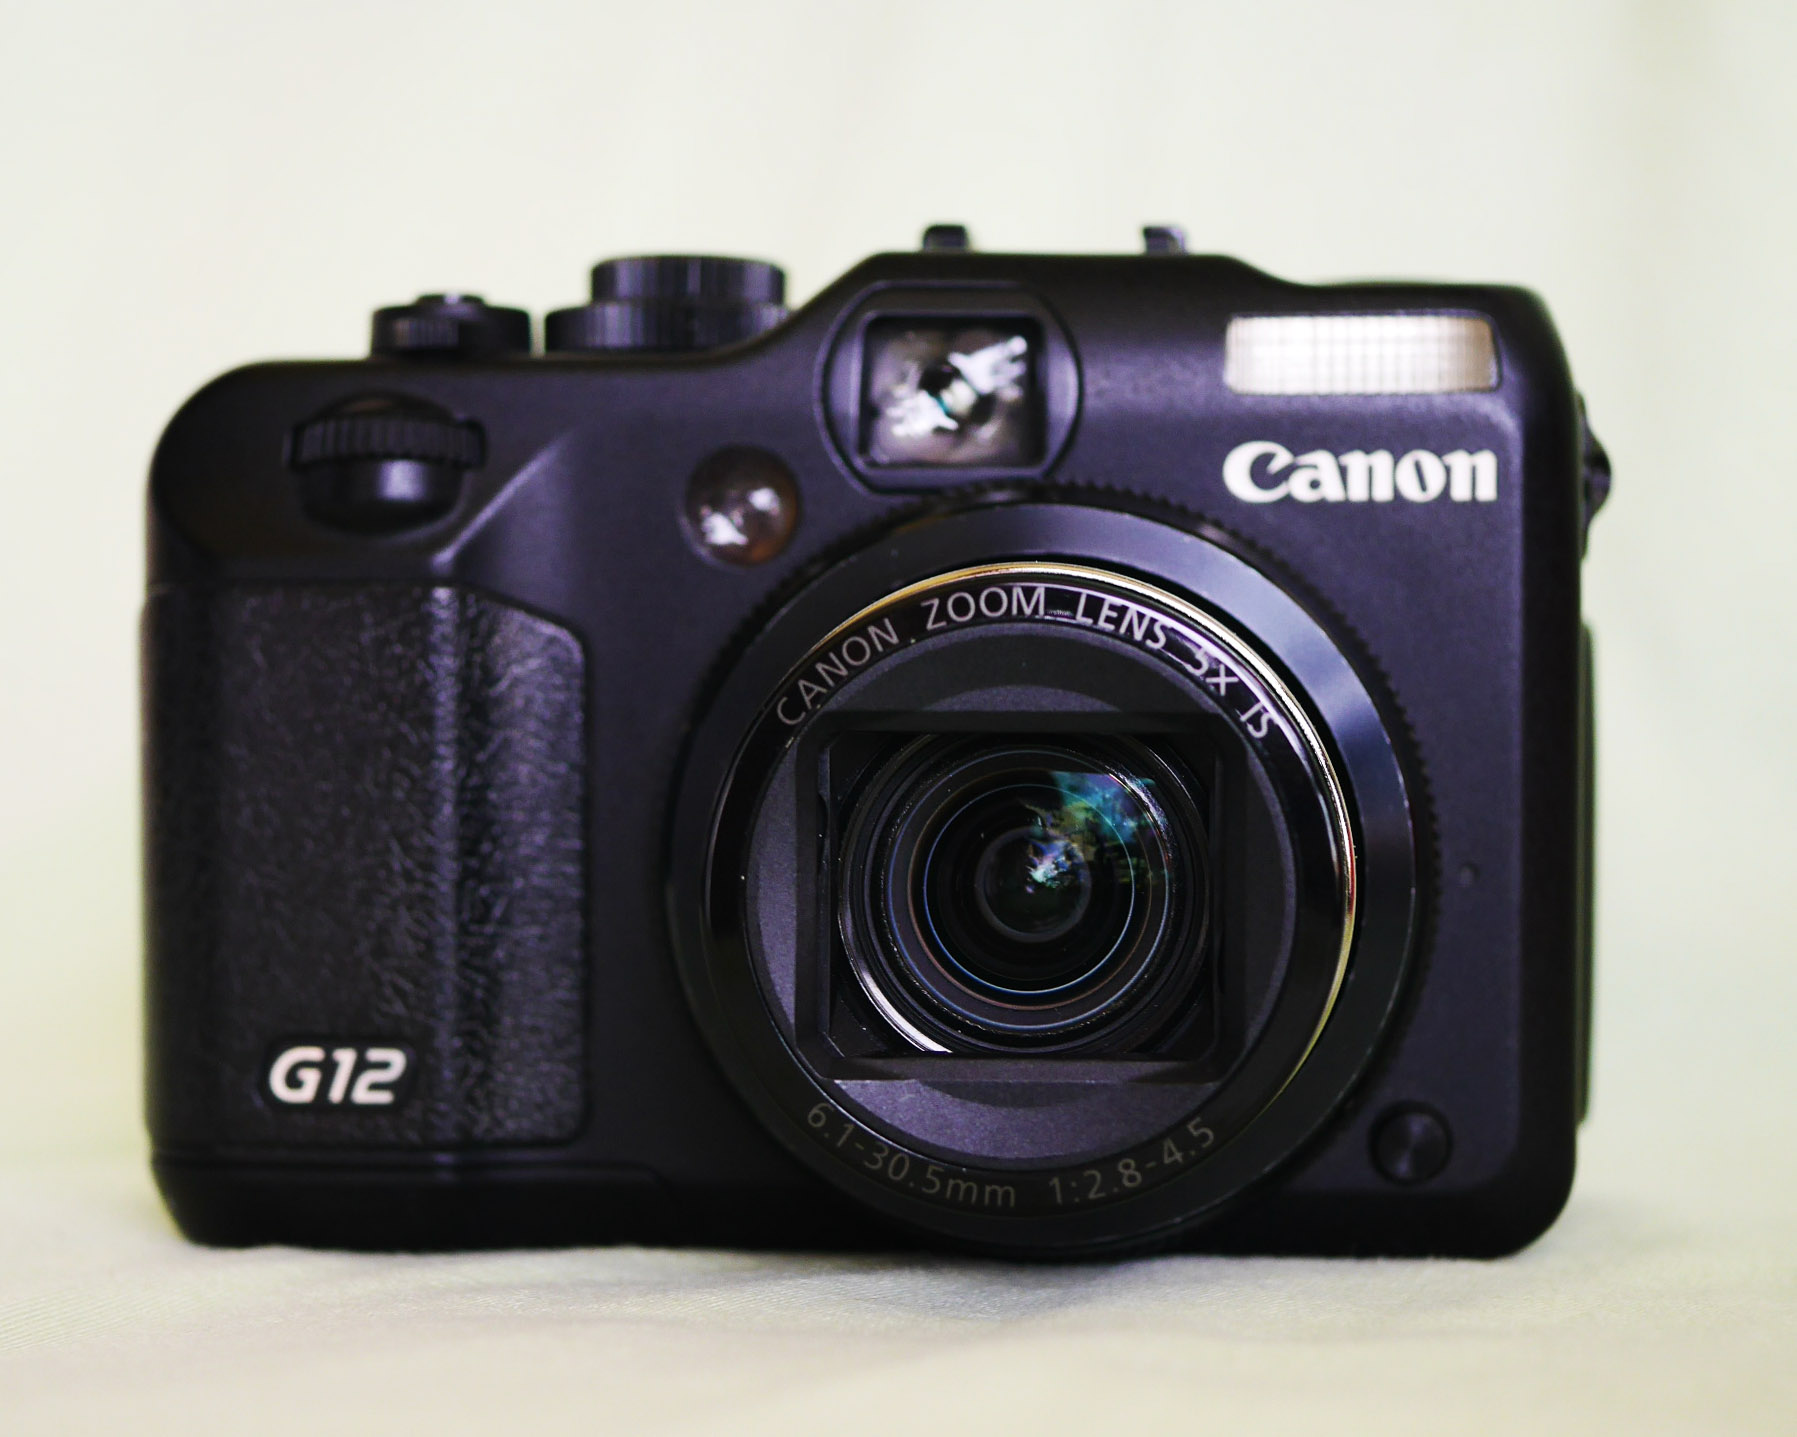 Canon PowerShot G12 Digital Camera f/2.8-4.5 28mm, 5x Optical Image Stabilized Zoom and 2.8 Inch Vari-Angle LCD, PC1564